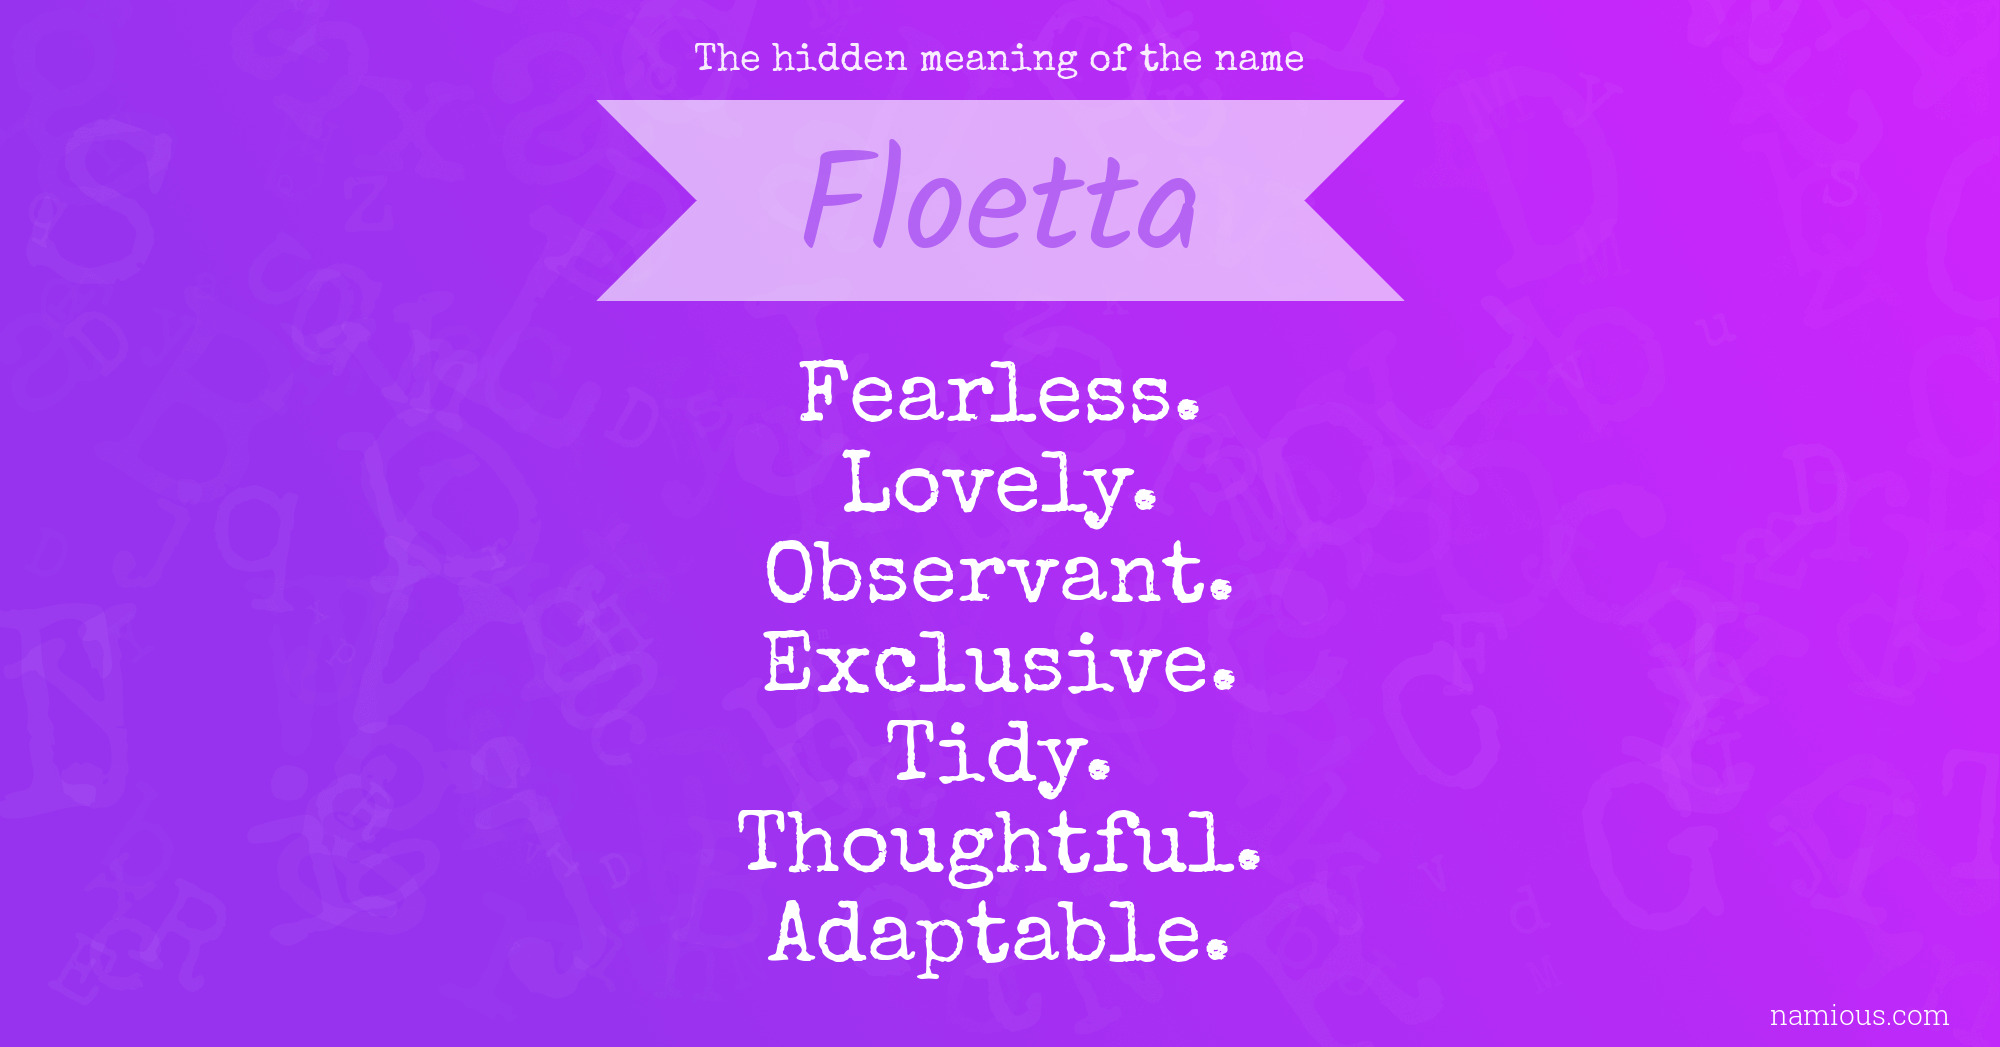 The hidden meaning of the name Floetta